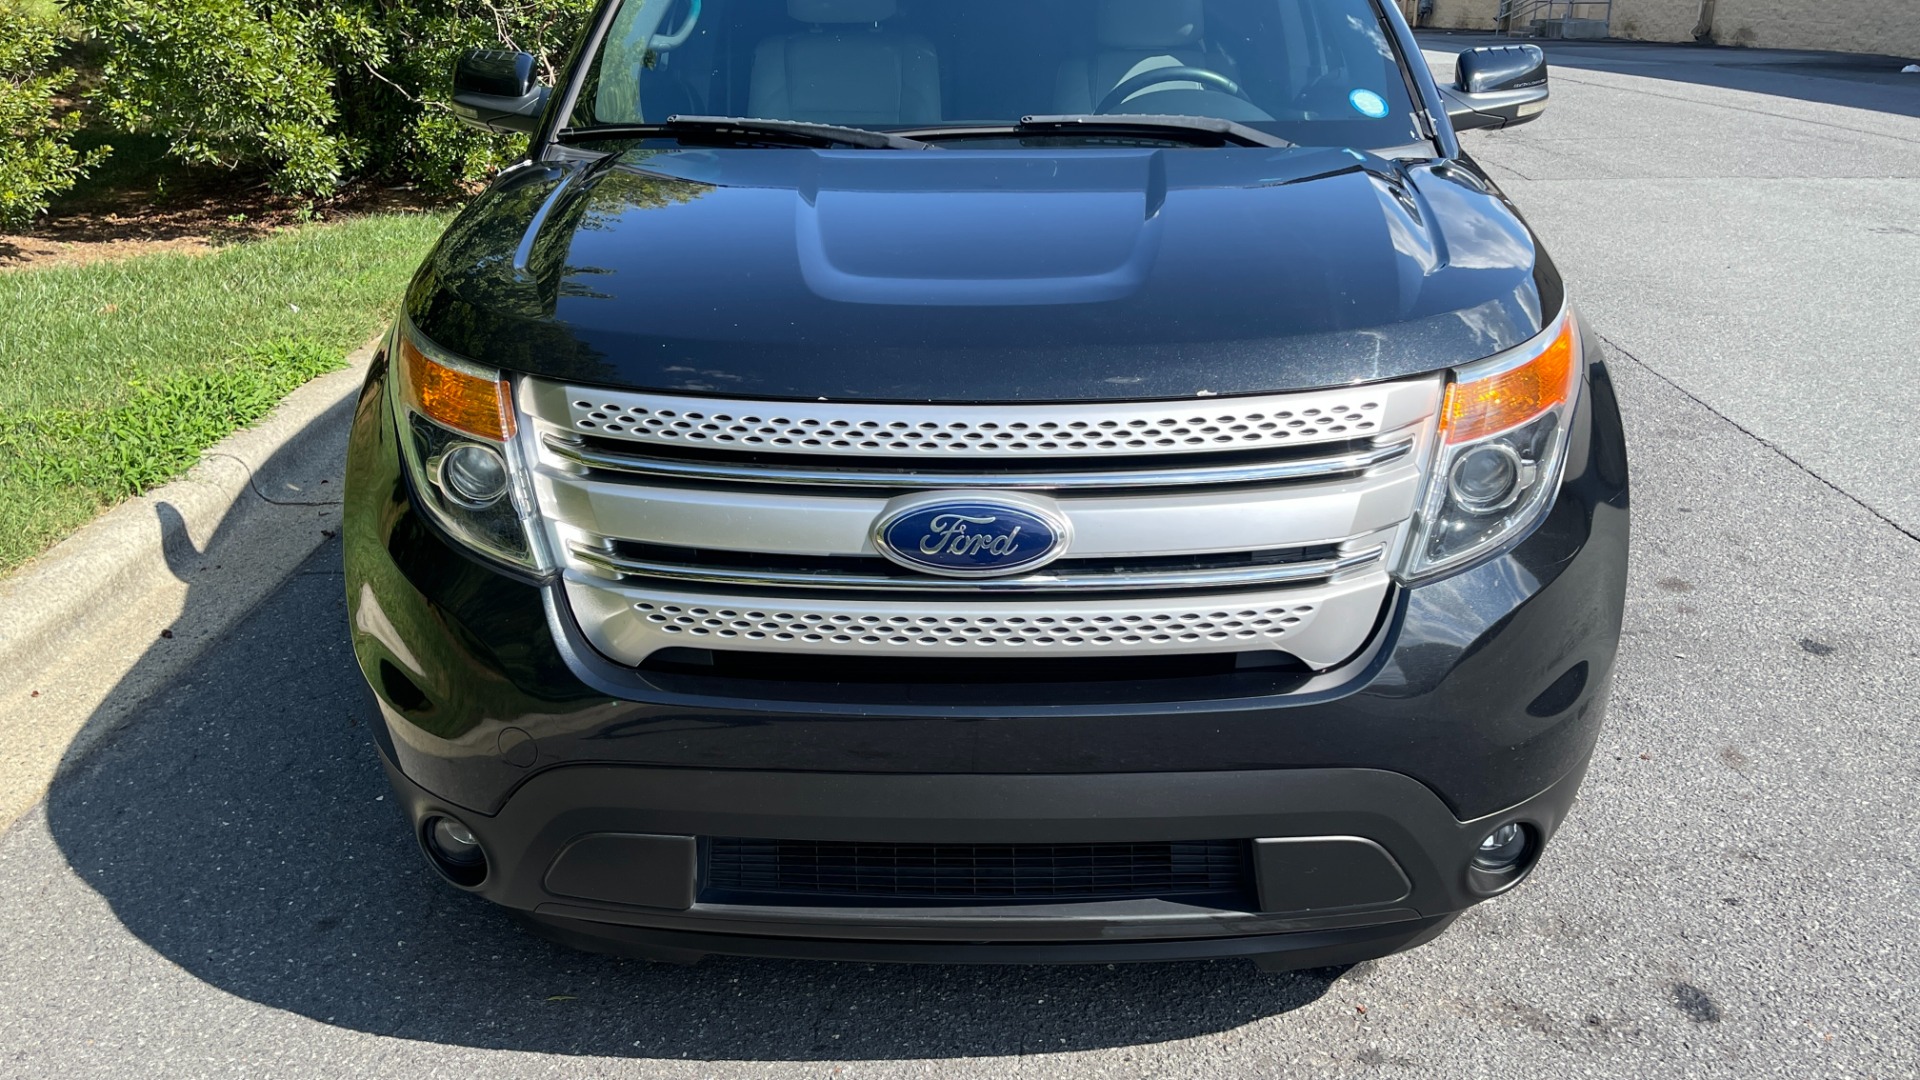 Used 2013 Ford Explorer XLT / LEATHER / COMFORT PACKAGE / 3.5 V6 / REAR VIEW CAMERA / DRIVER CONNEC for sale $13,995 at Formula Imports in Charlotte NC 28227 8